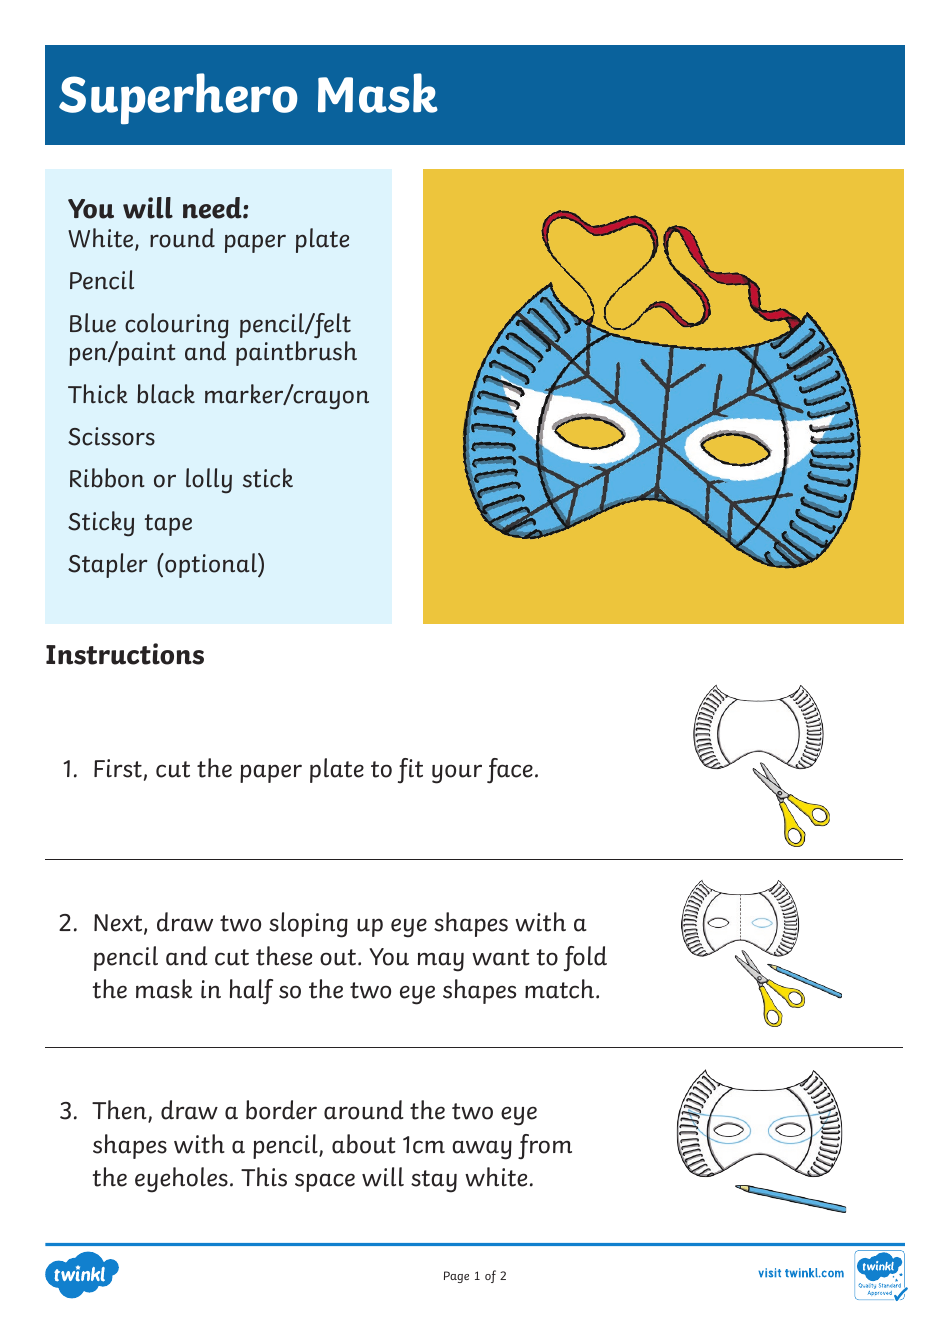 Paper Plate Superhero Mask Craft Instructions Preview